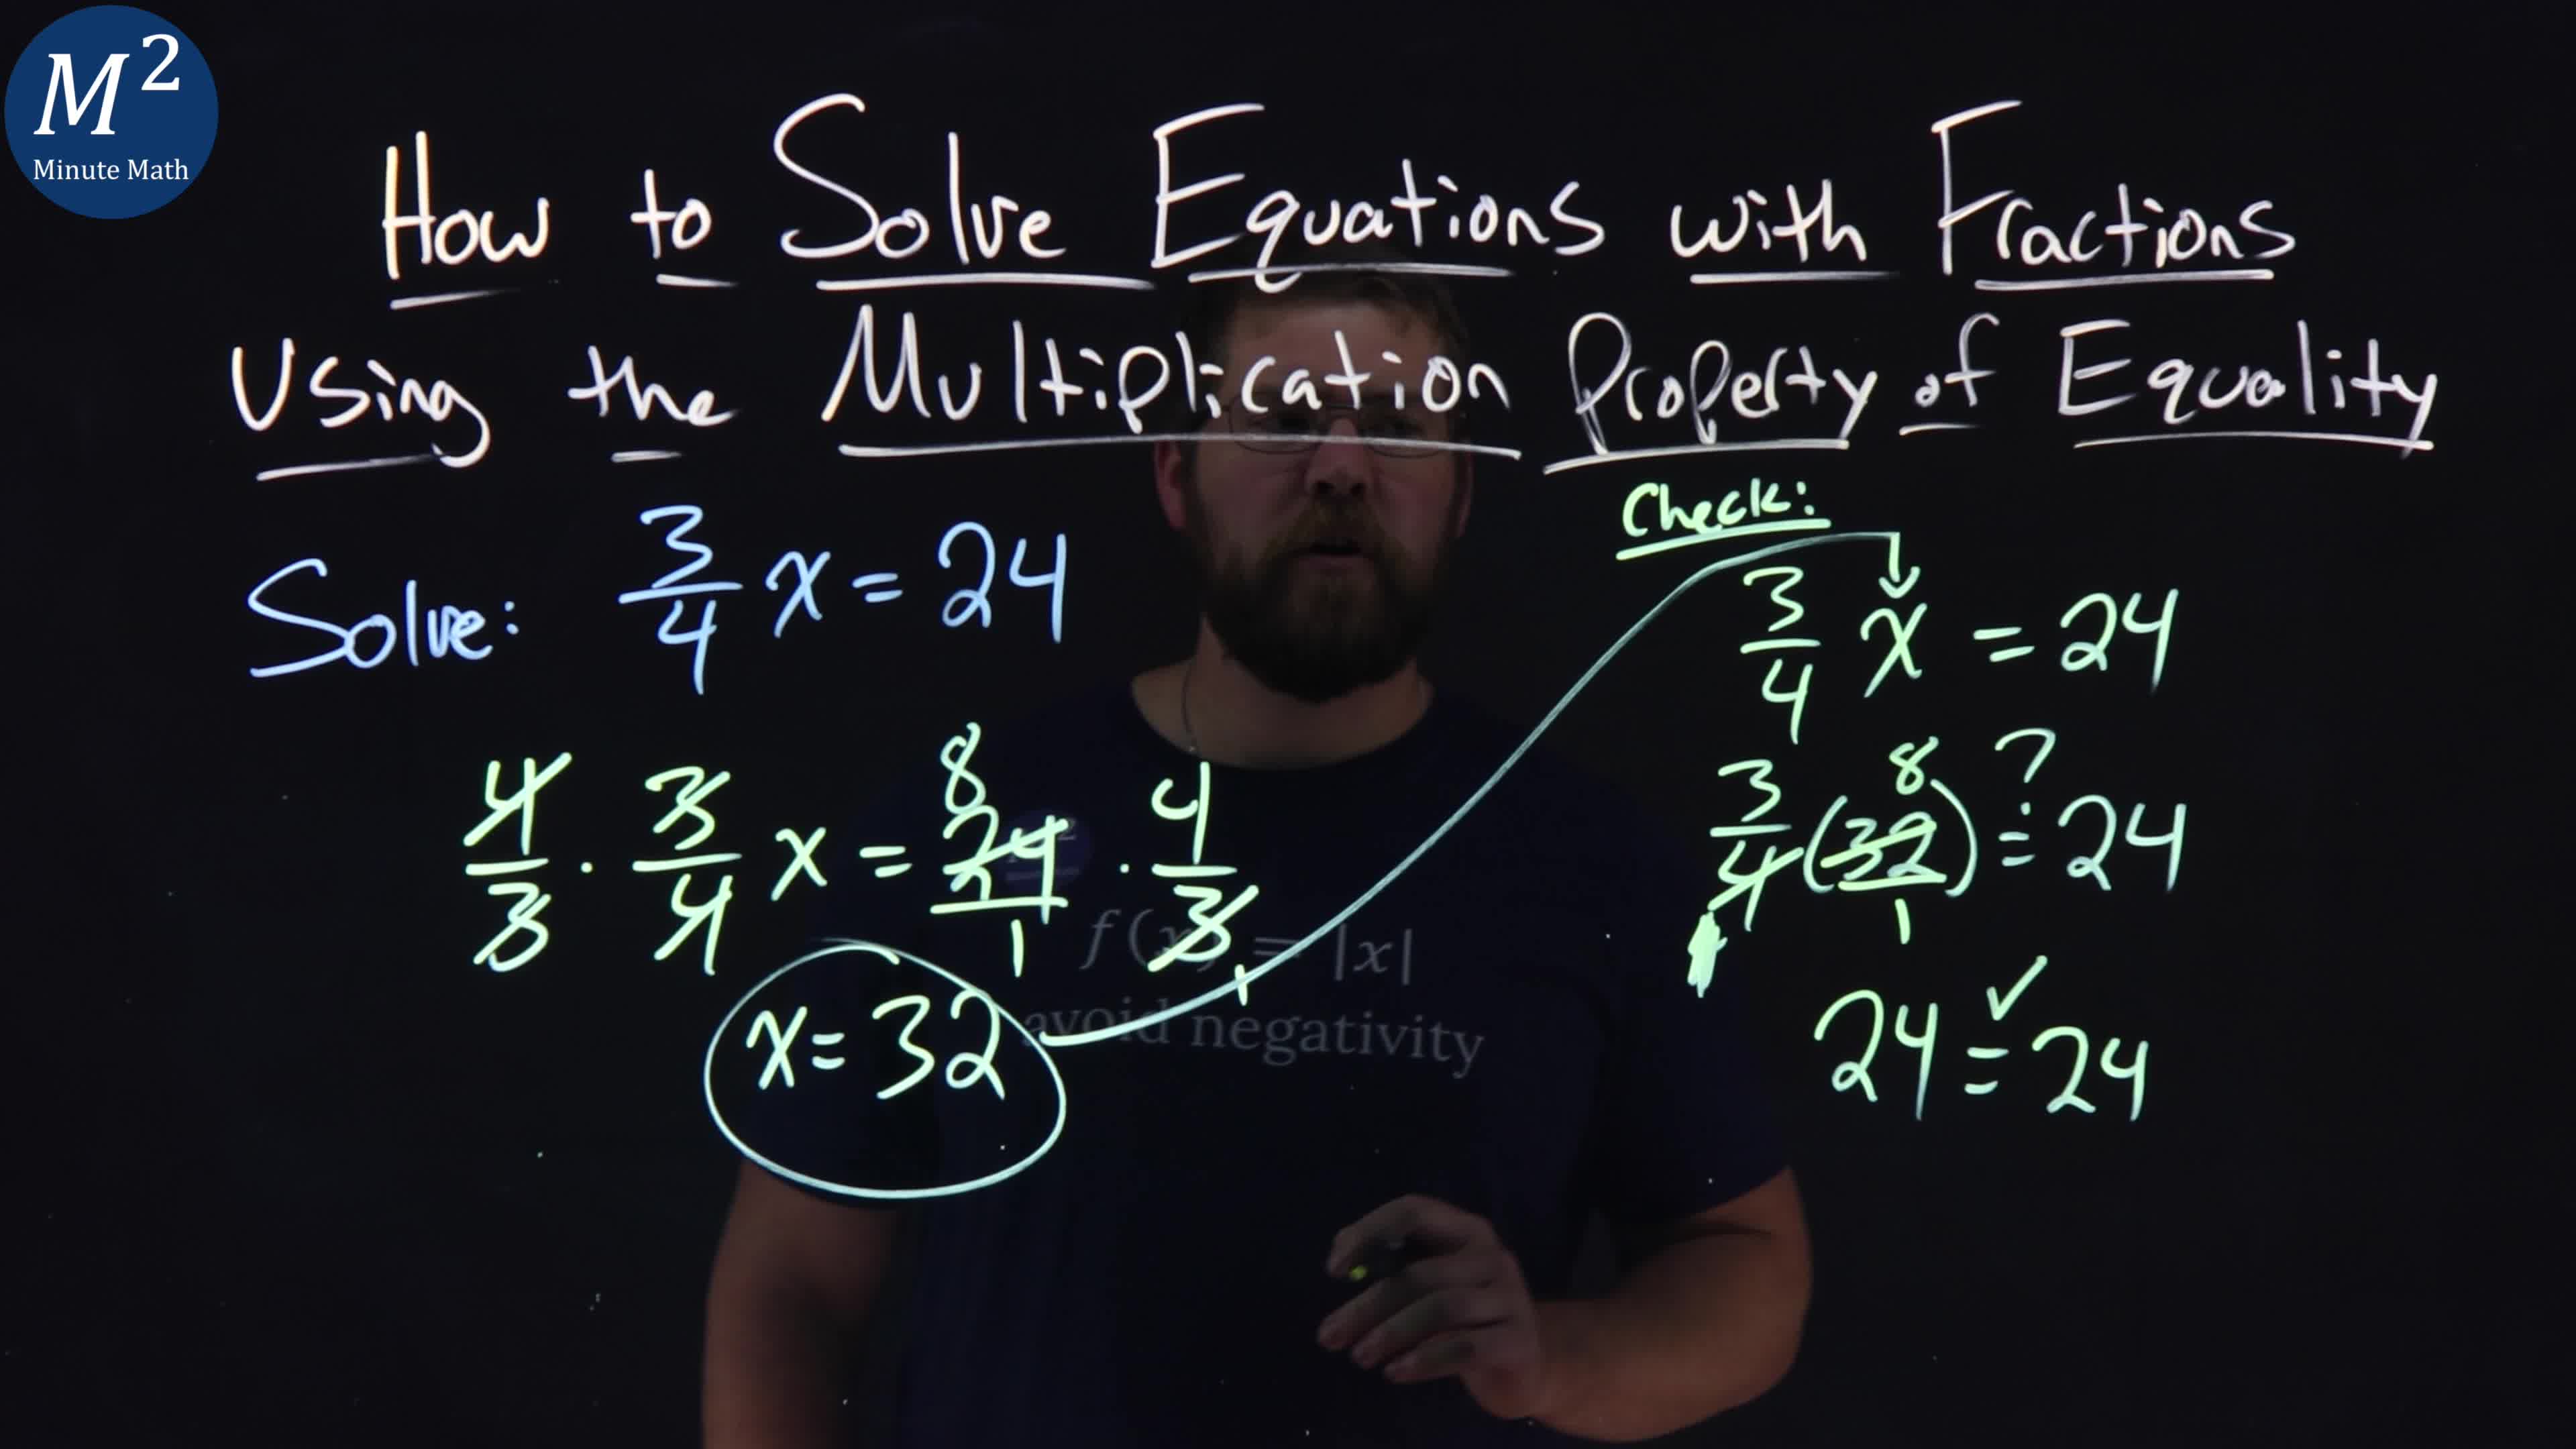 solve-equations-with-fractions-using-the-multiplication-property-of-equality-3-4-x-24-ex-4-of-5